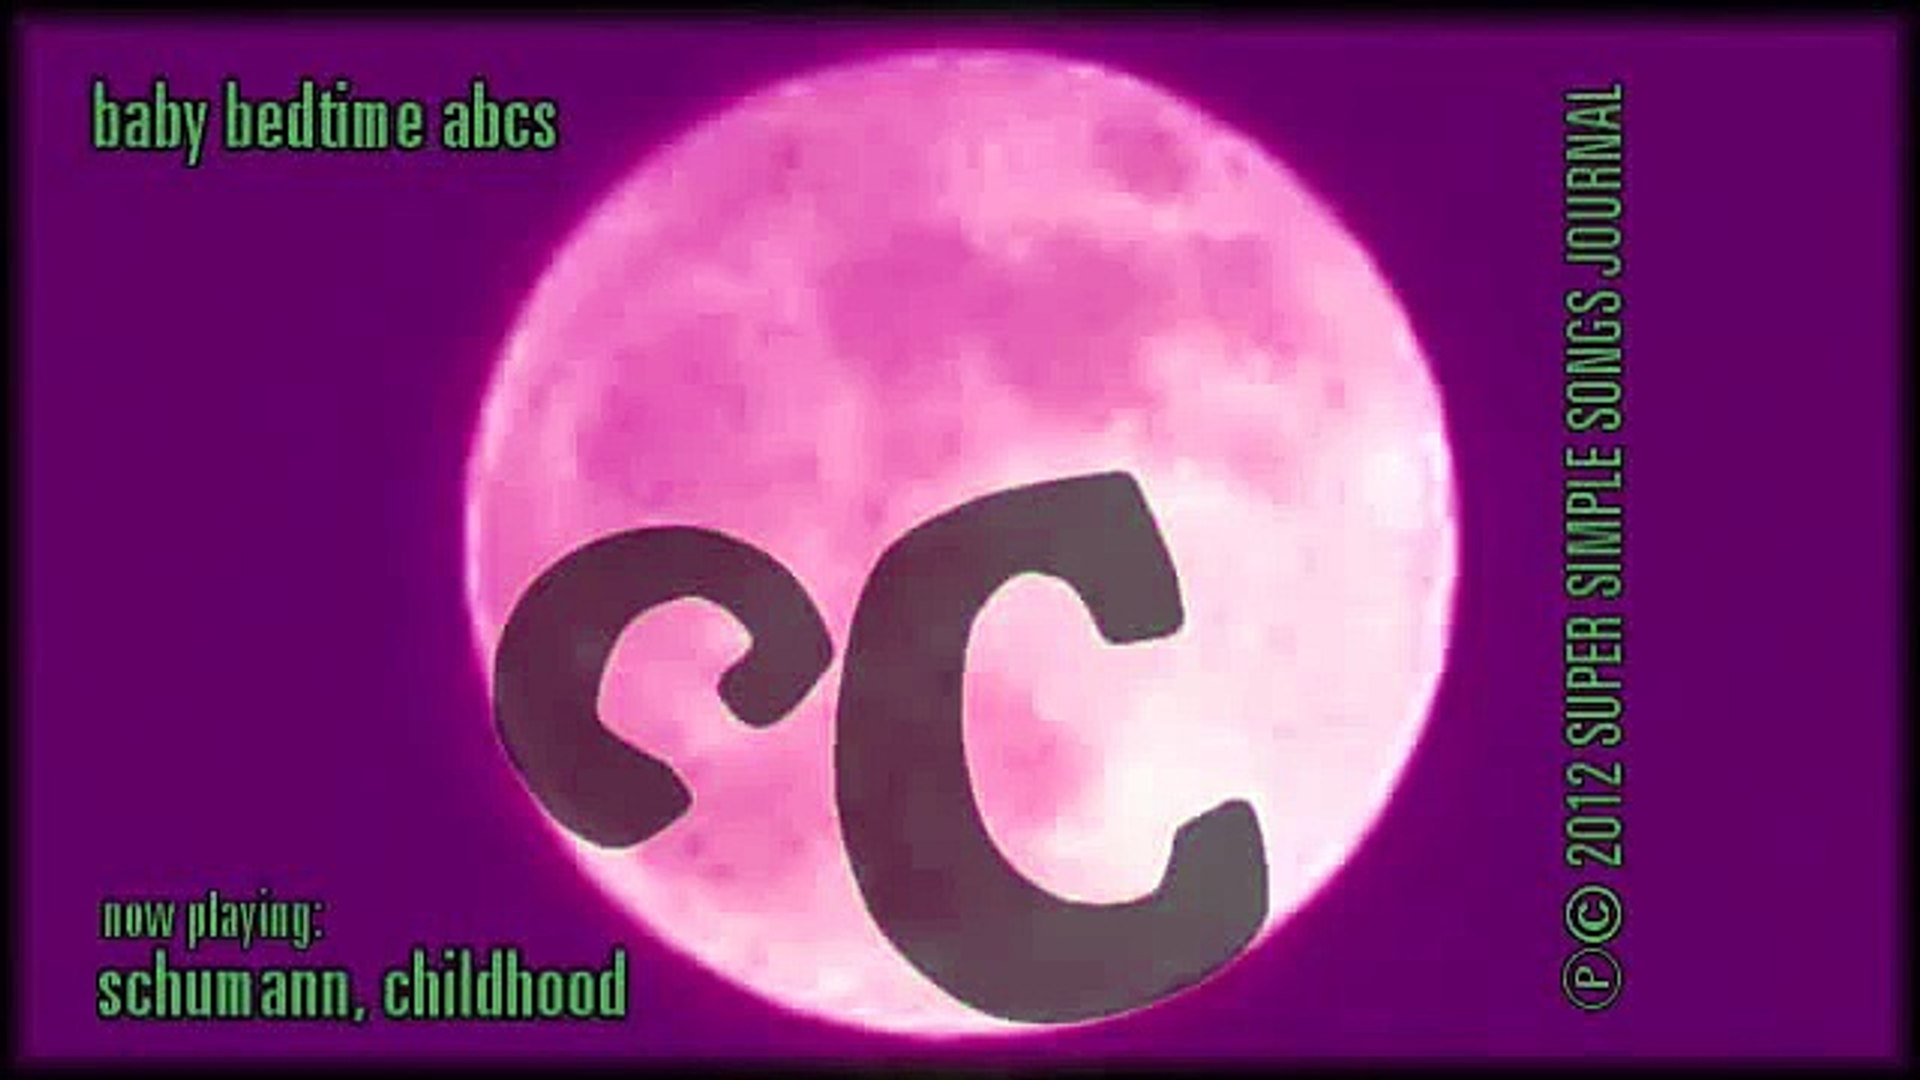 ABC Songs for Babies playlist - Letter C ABC song lullaby story - Alphabet song for baby playlist